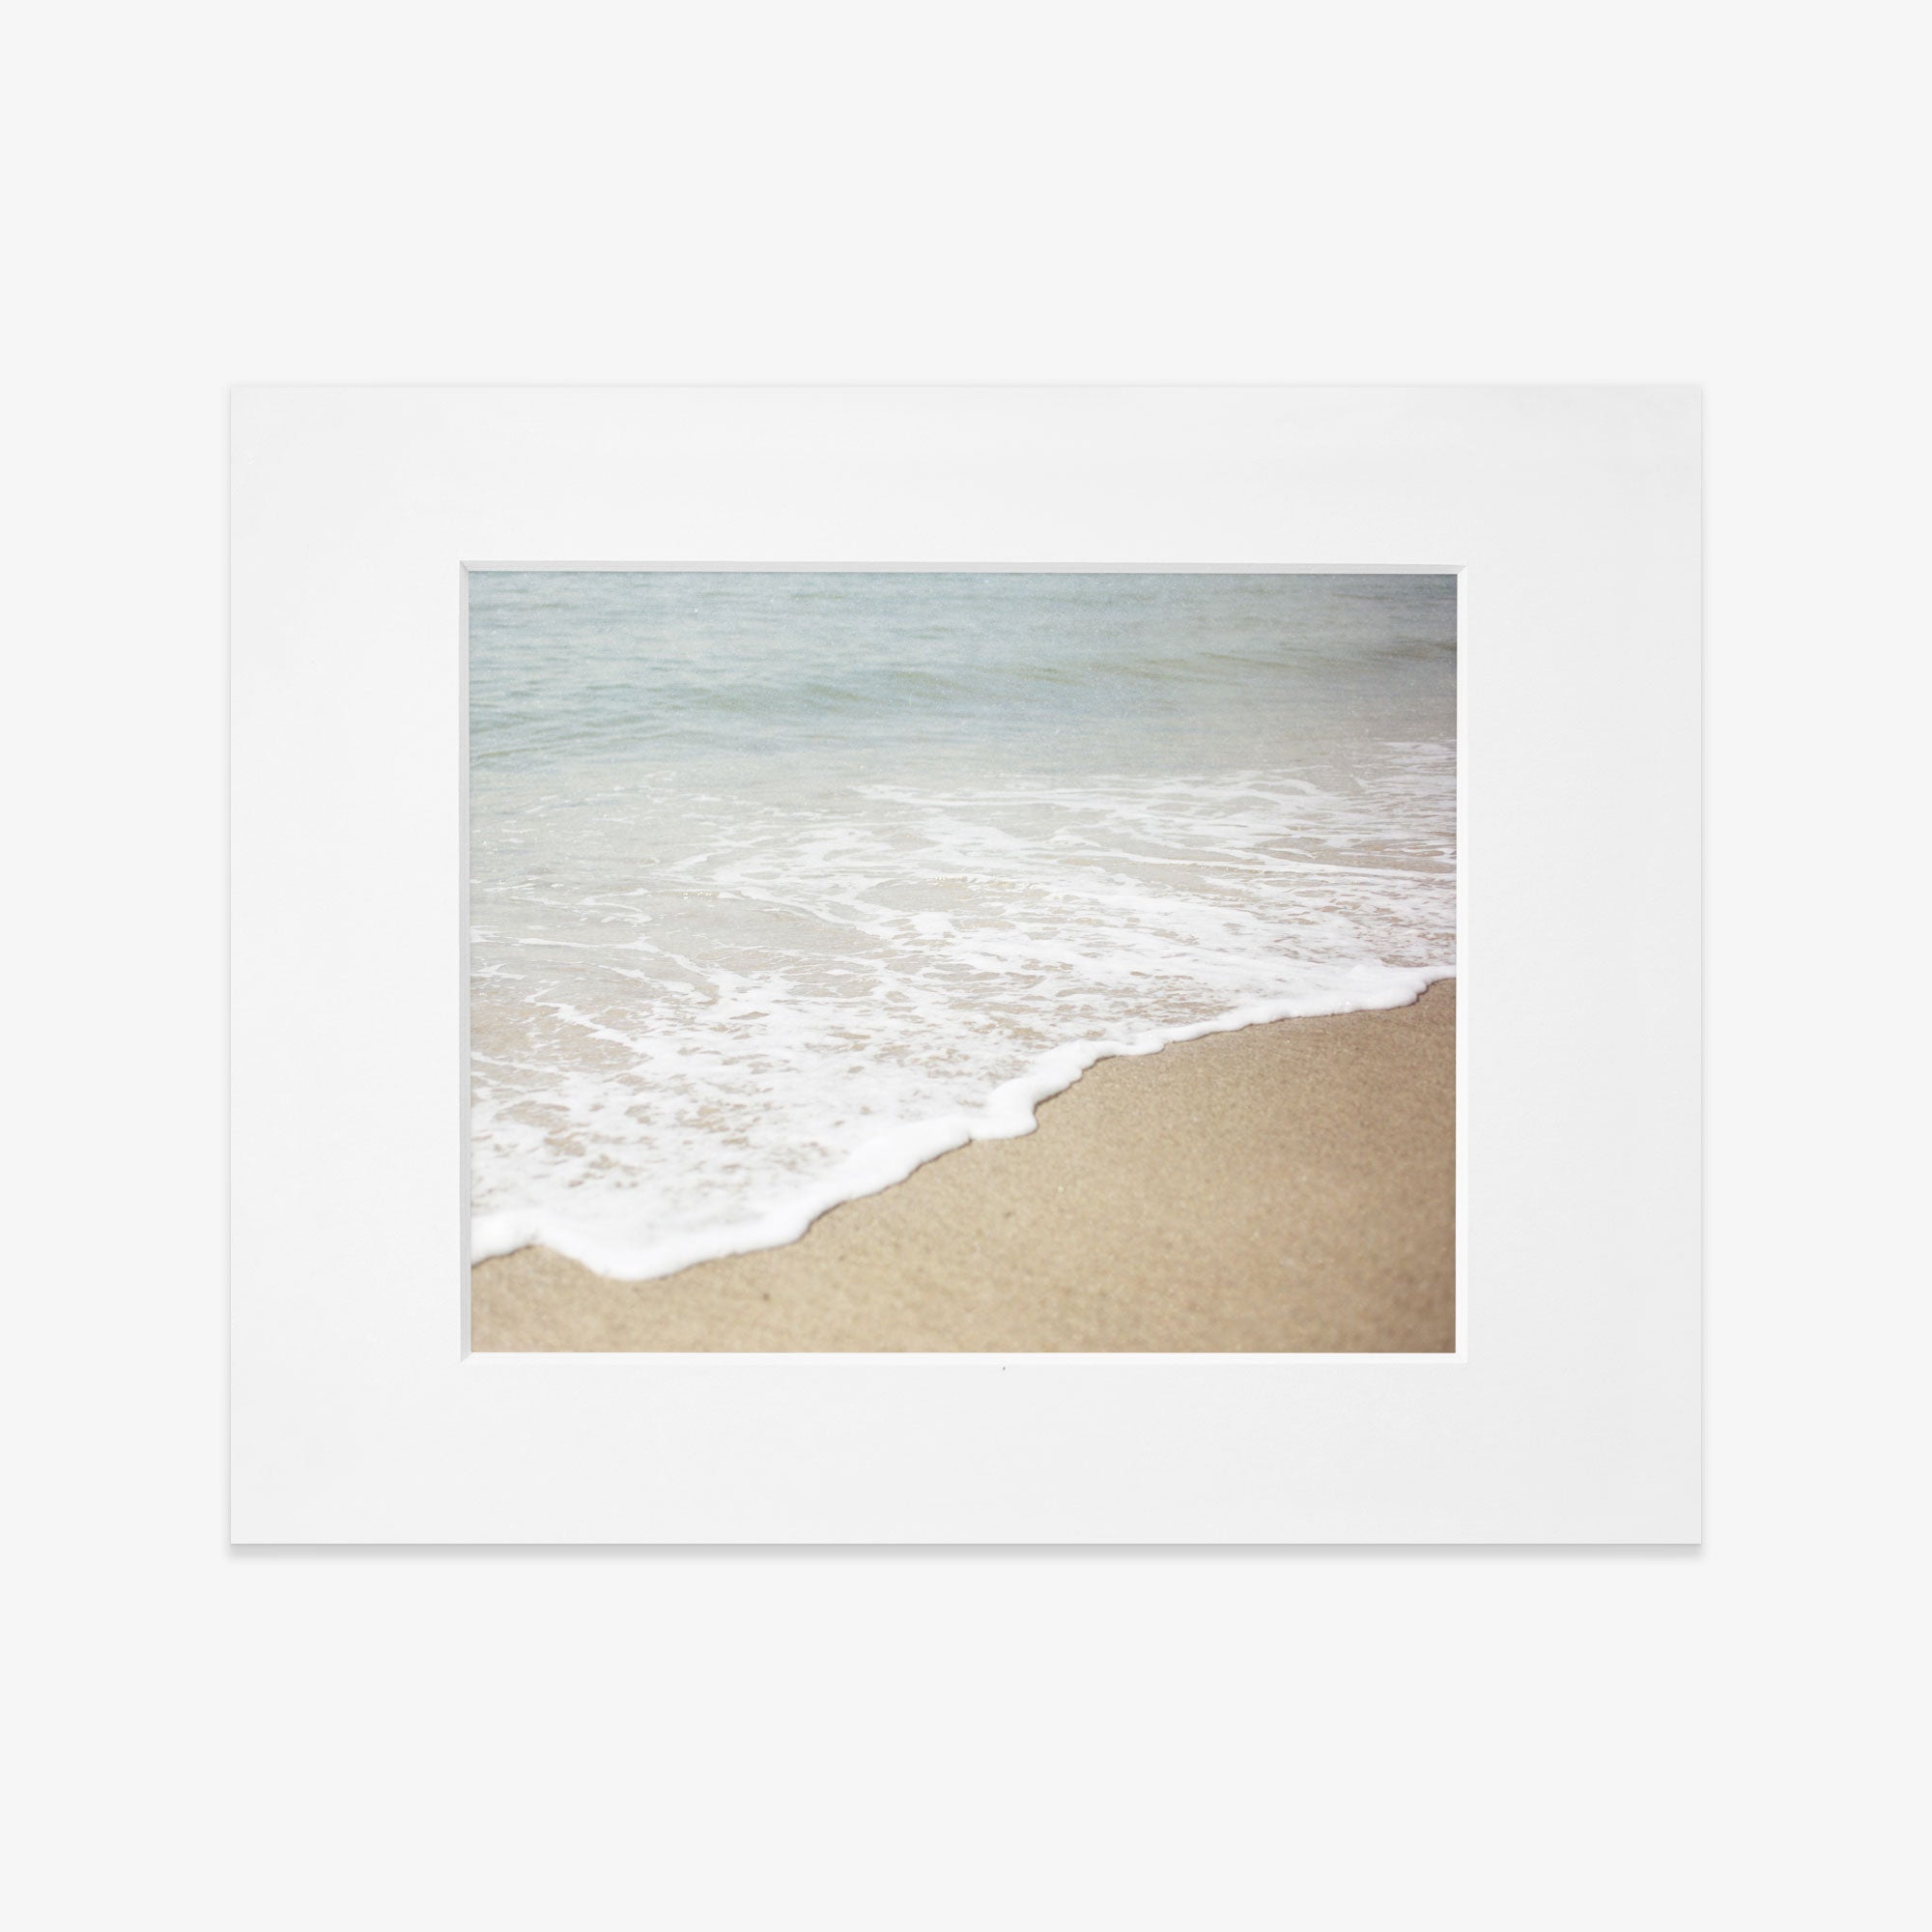 A Beach Waves Print, &#39;Chasing Surf&#39; by Offley Green capturing the serene interaction between the ocean and the shore with a polaroid photo.